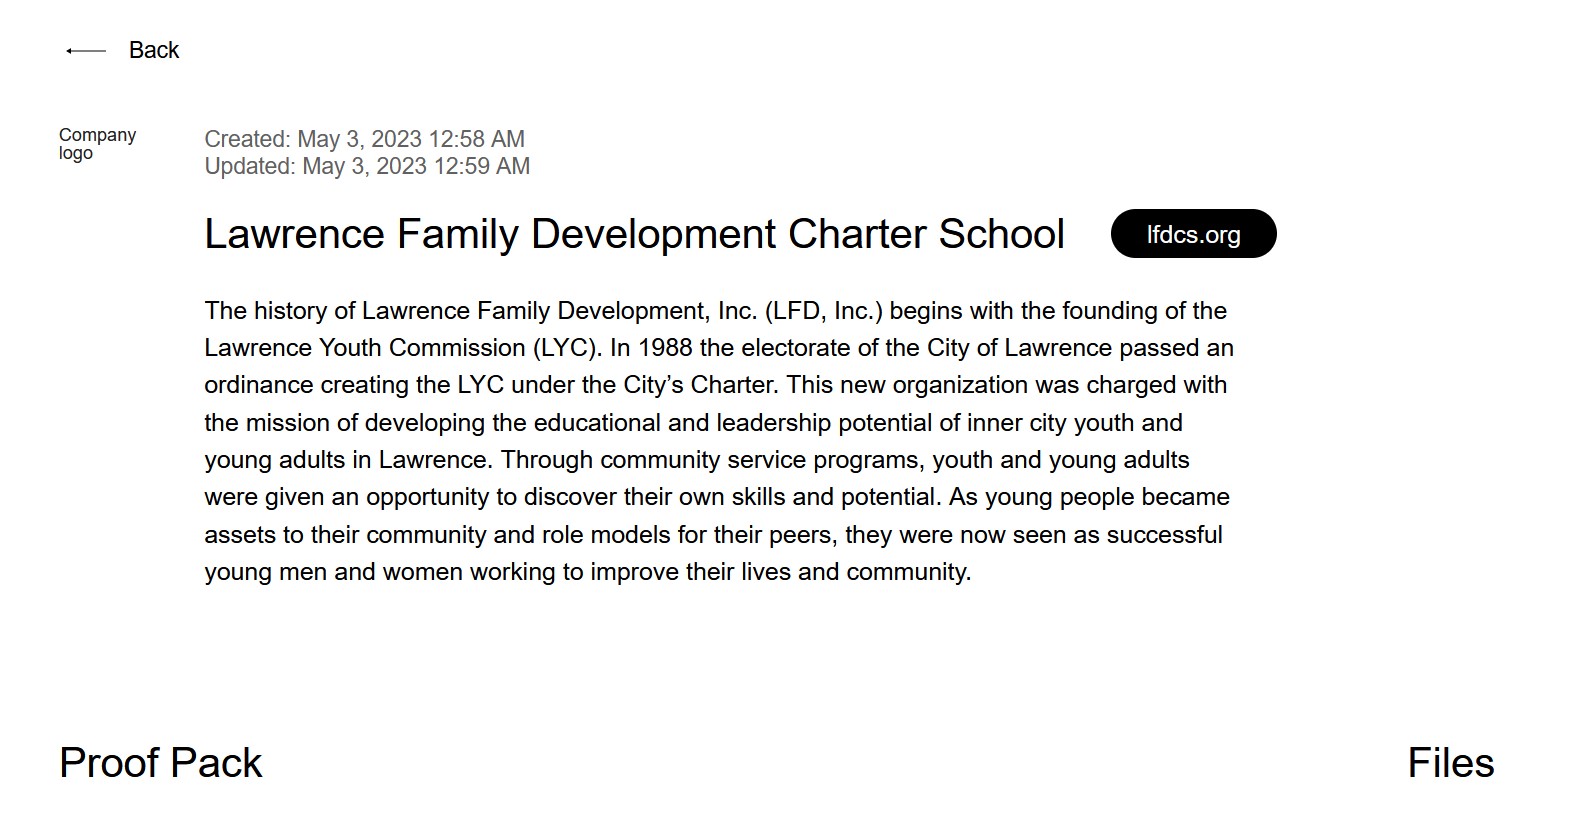 Listing on Snatch Team simply quotes information about the charter school from the school's website.